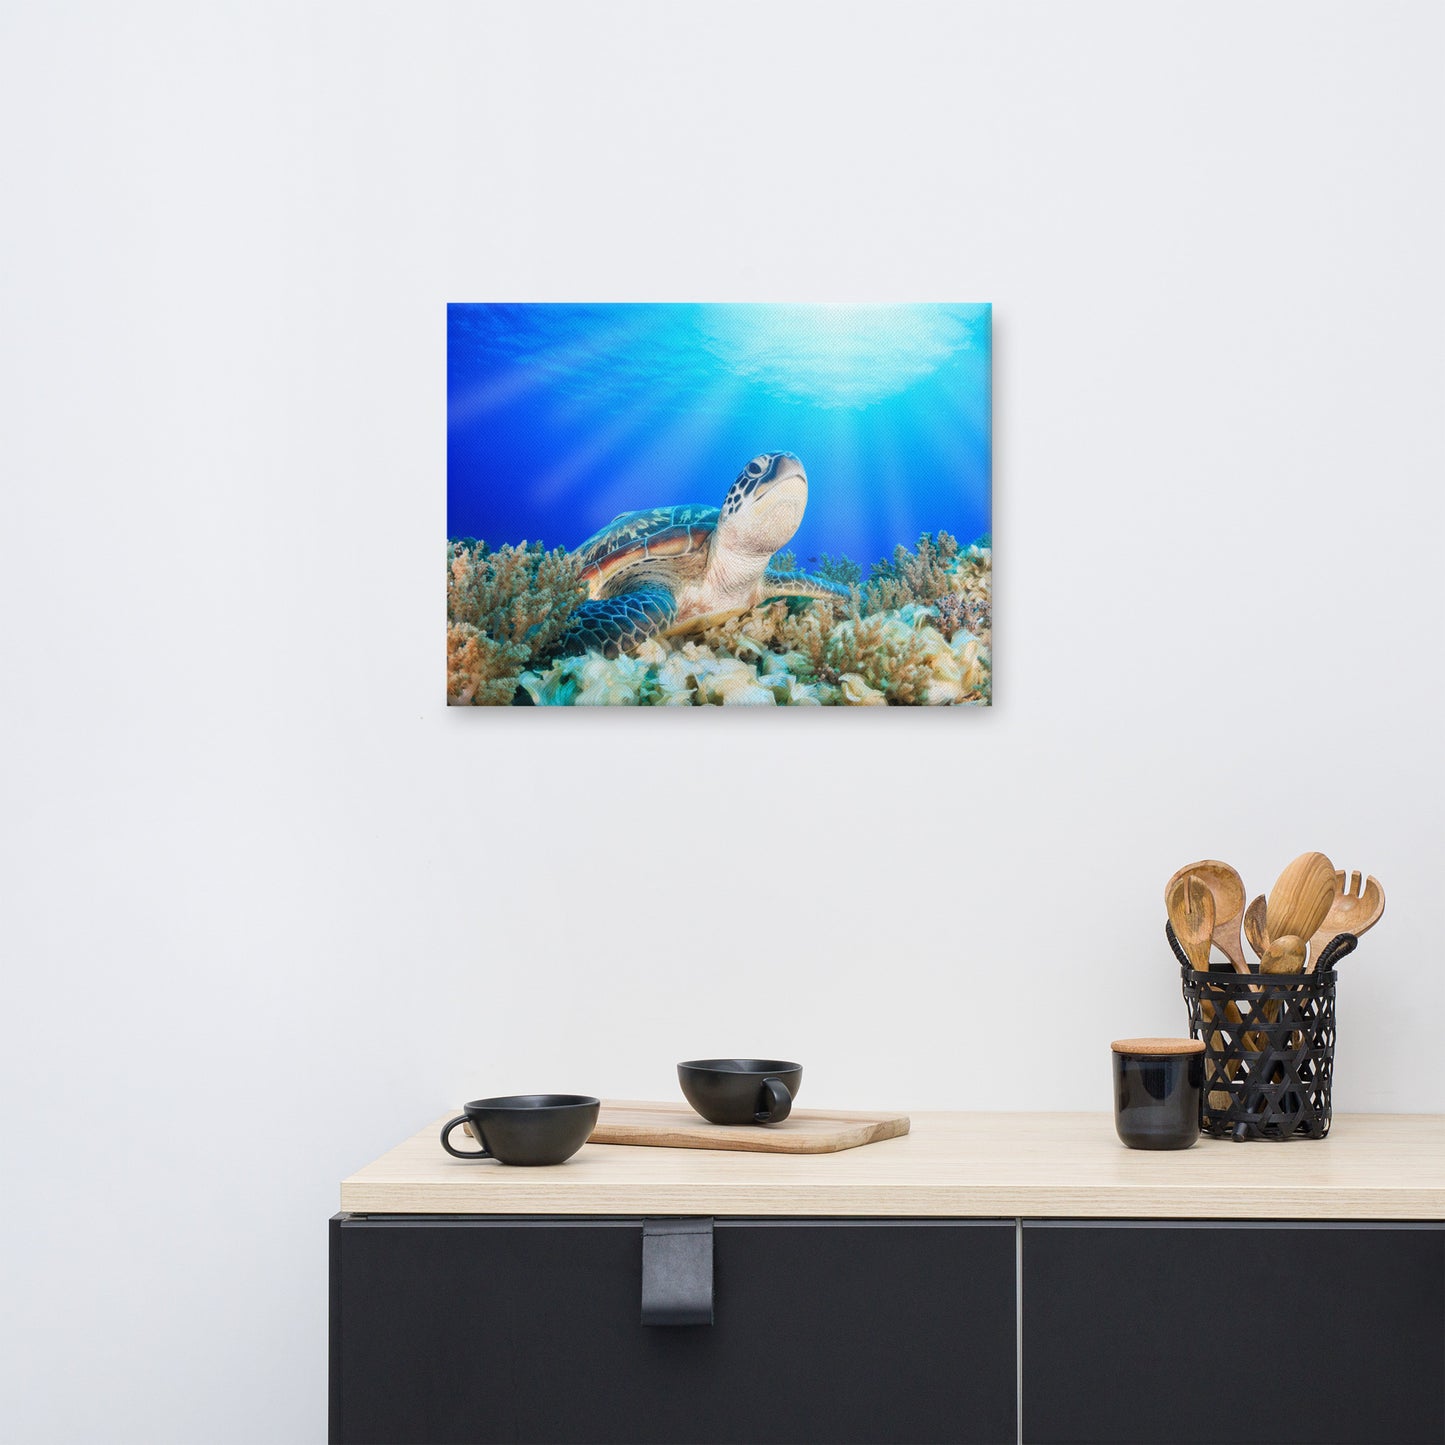 Green Sea Turtle In Tropical Coral Reef Animal Wildlife Photo Canvas Wall Art Print